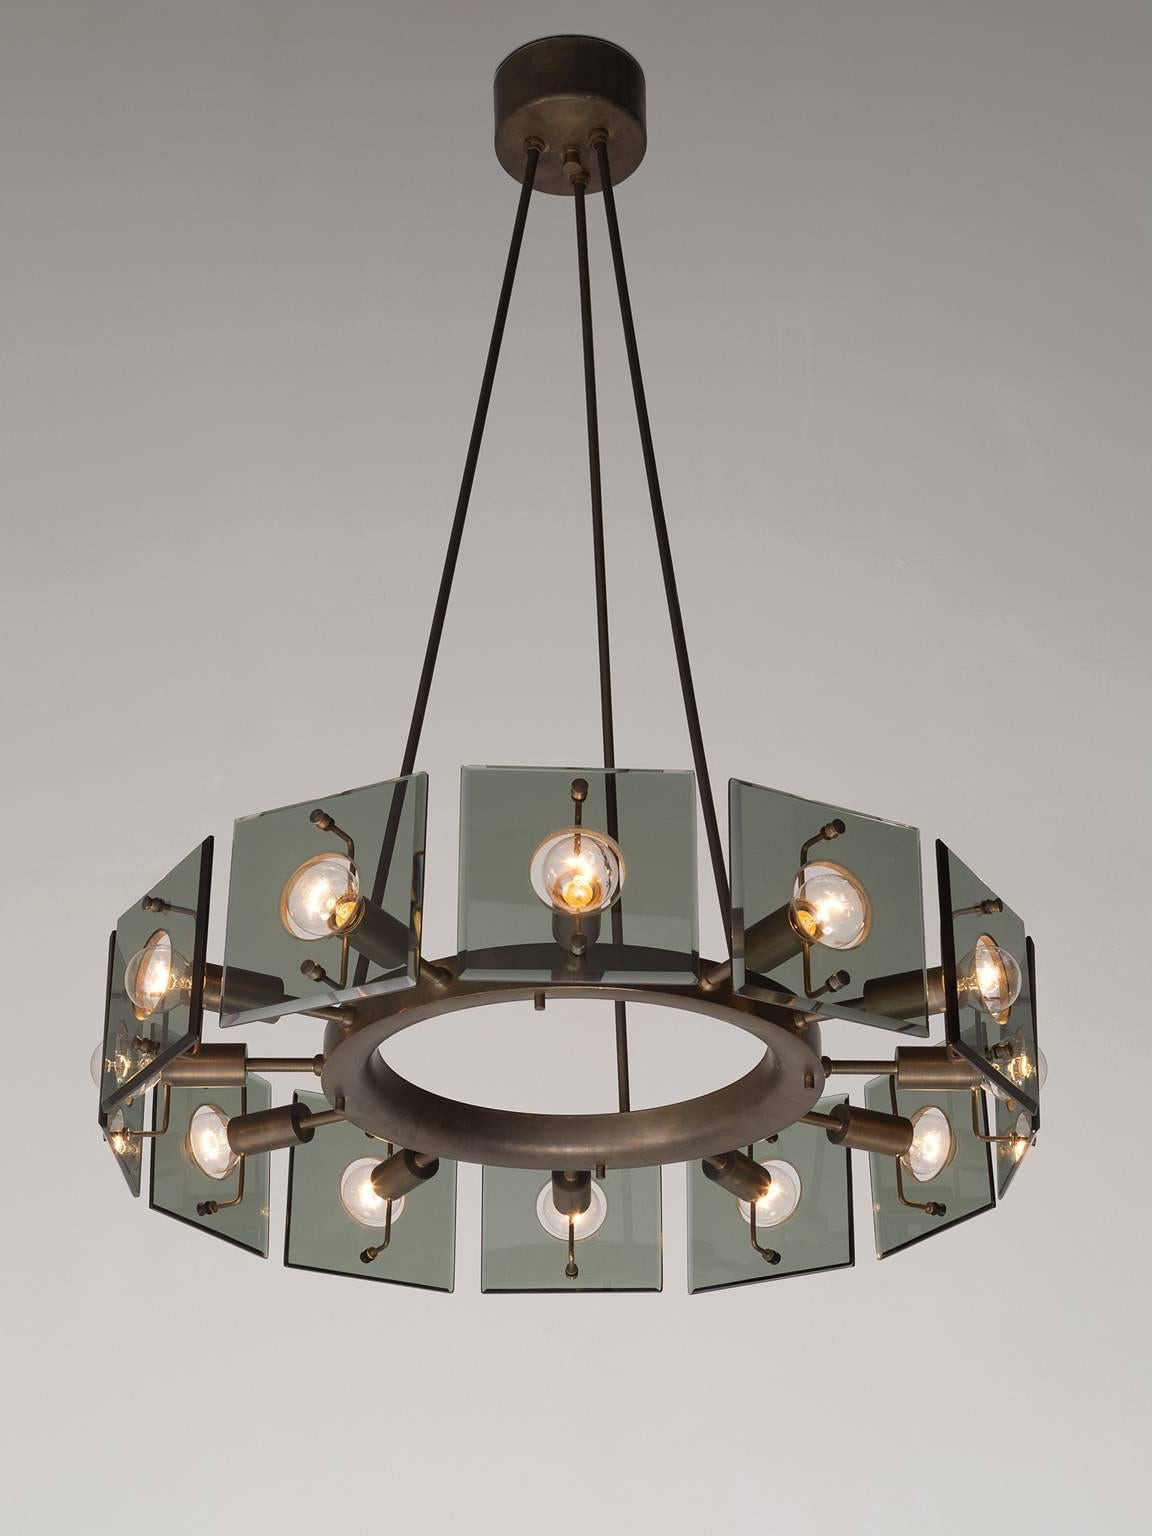 Stunning round chandelier in glass, metal and brass in the style of Max Ingrand for Fontana Arte, 1950s

Unique round chandelier. The fixture is made of three brass stems, which run into a round shaped shade with 12 light points that are covered